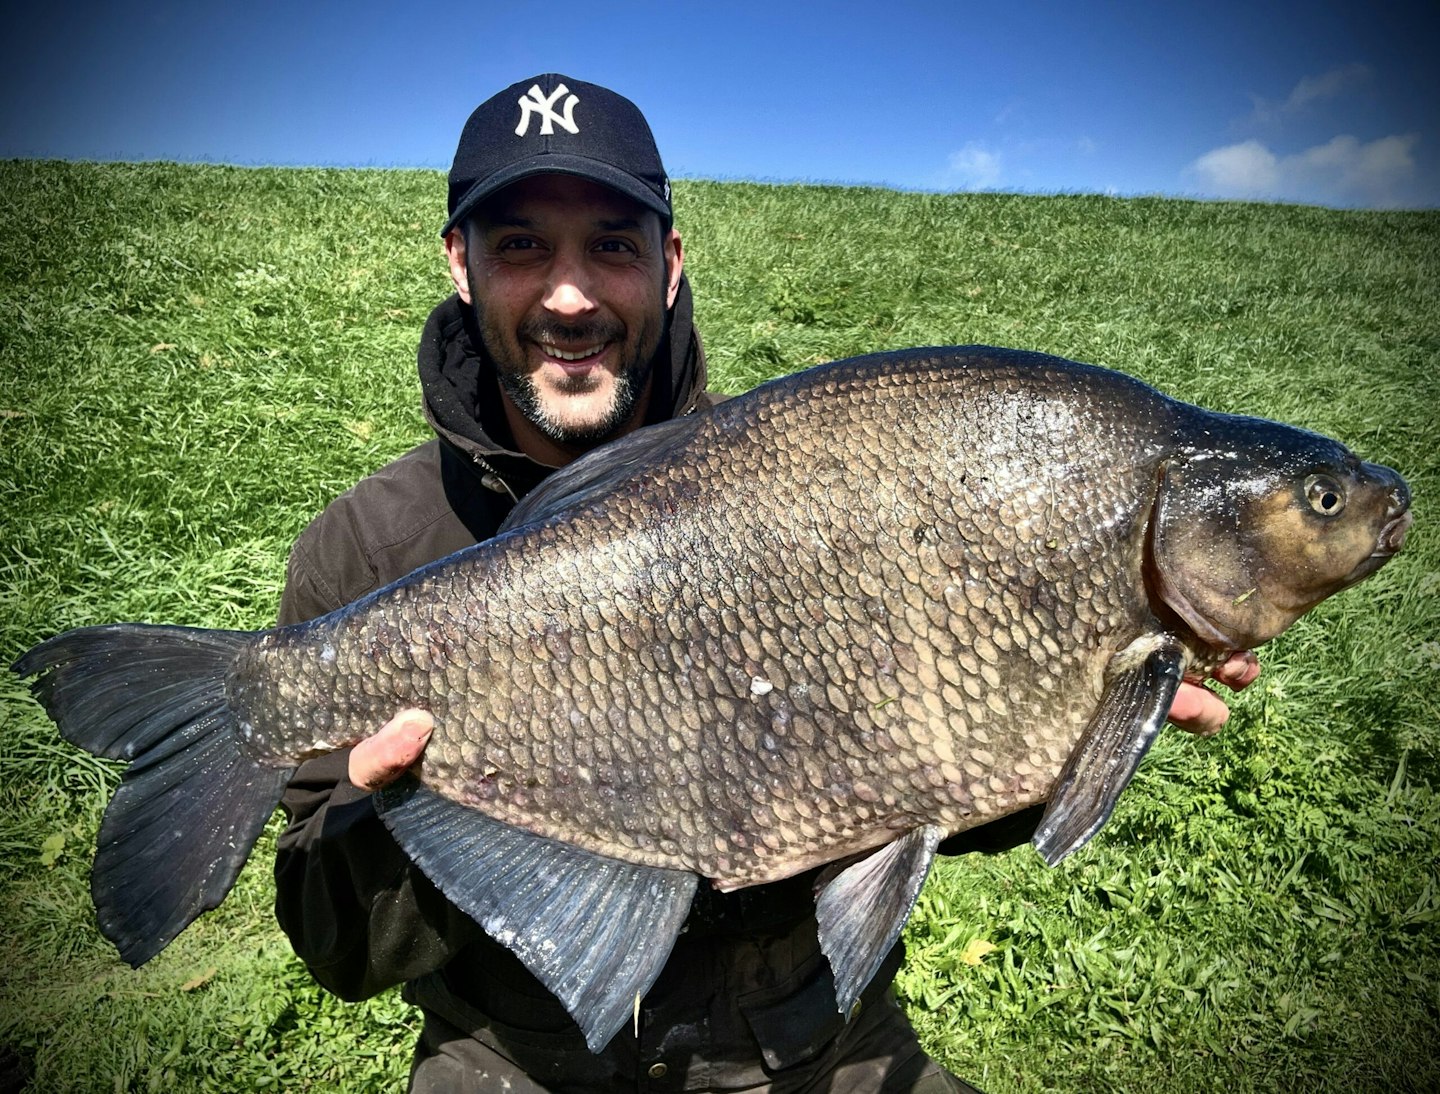 There aren't many better looking bream than this!